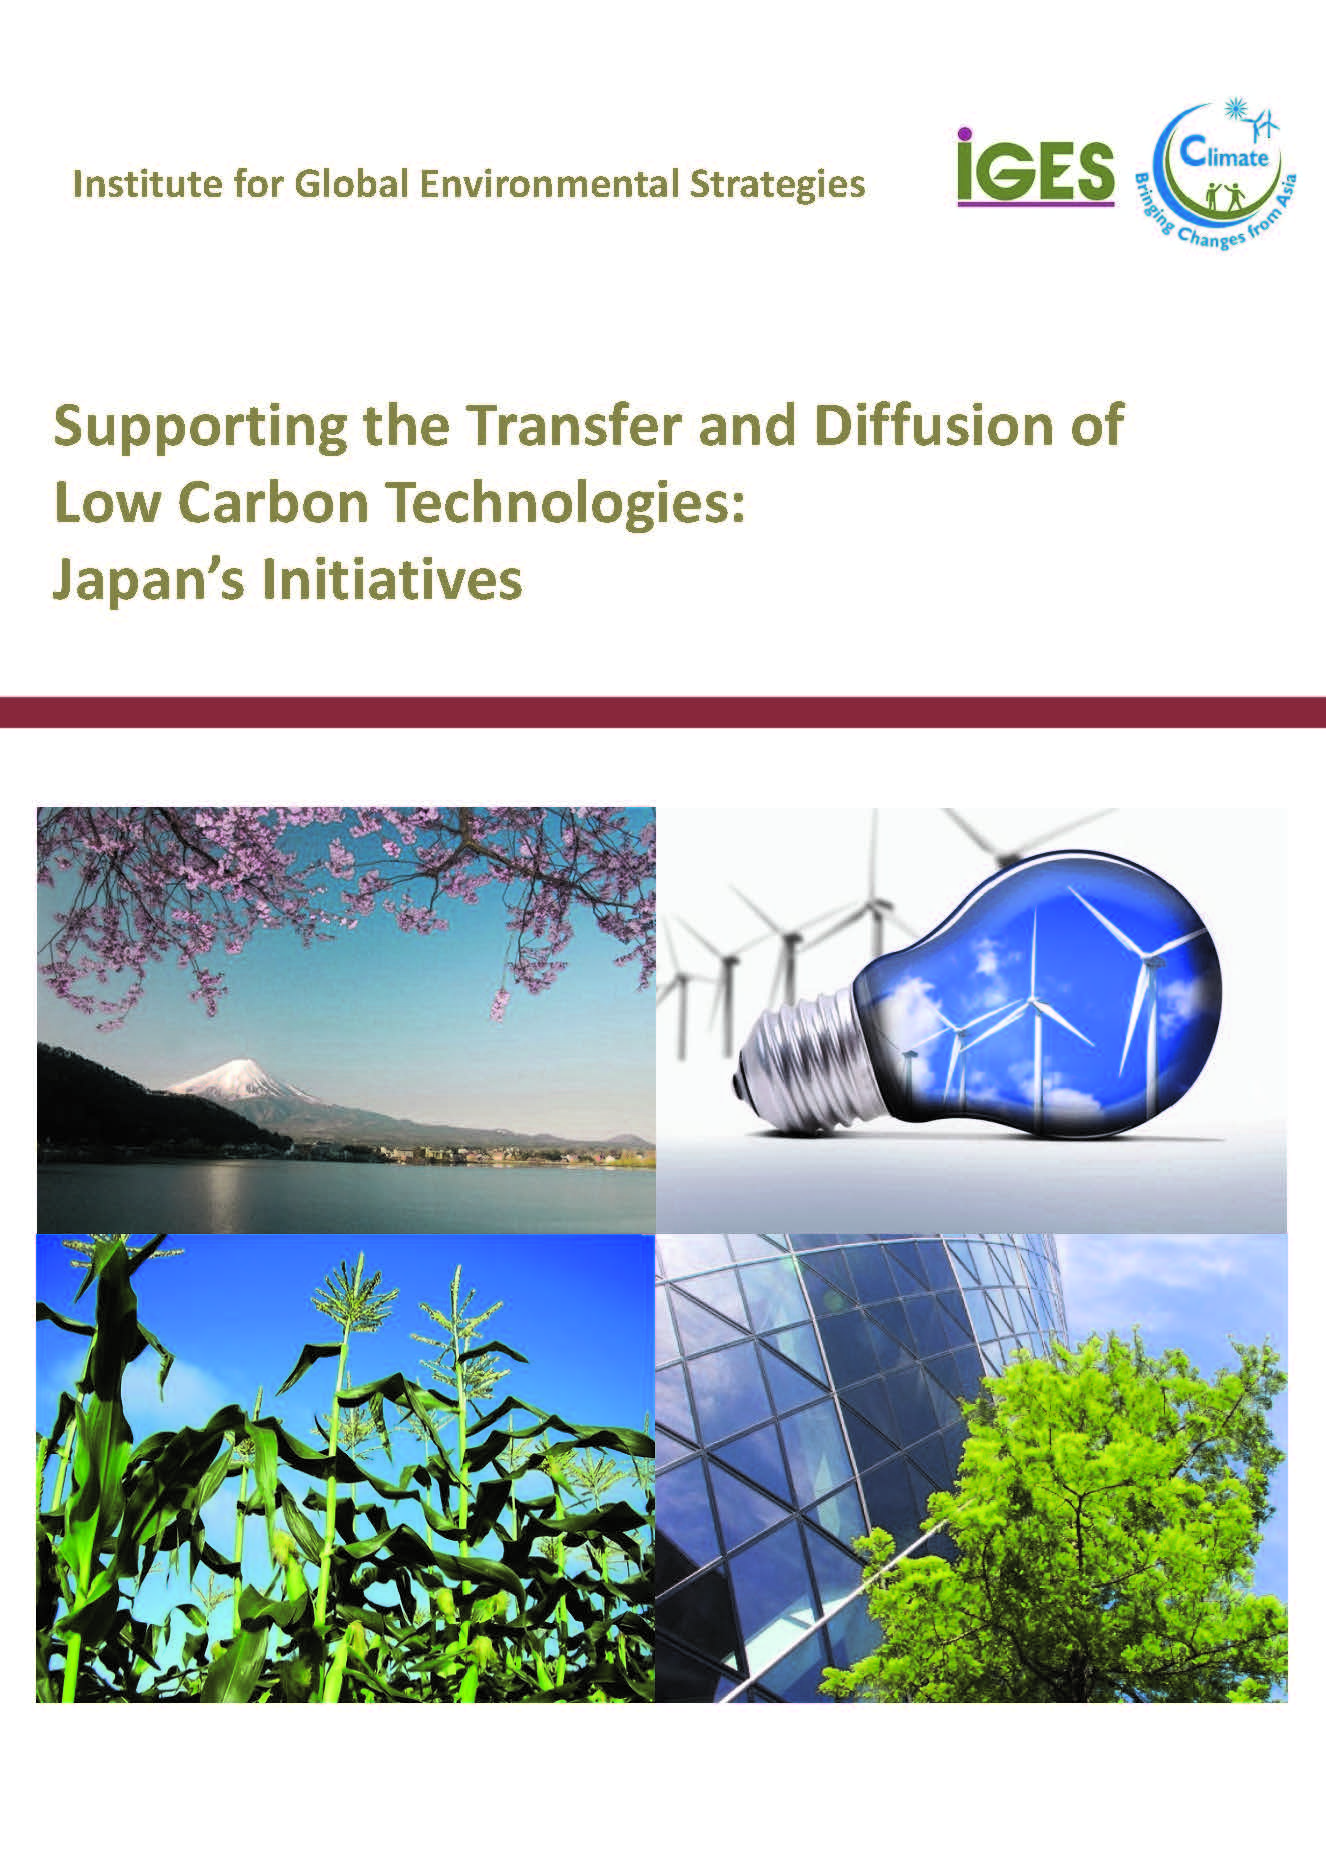 Supporting the Transfer and Diffusion of Low Carbon Technologies: Japan’s Initiatives